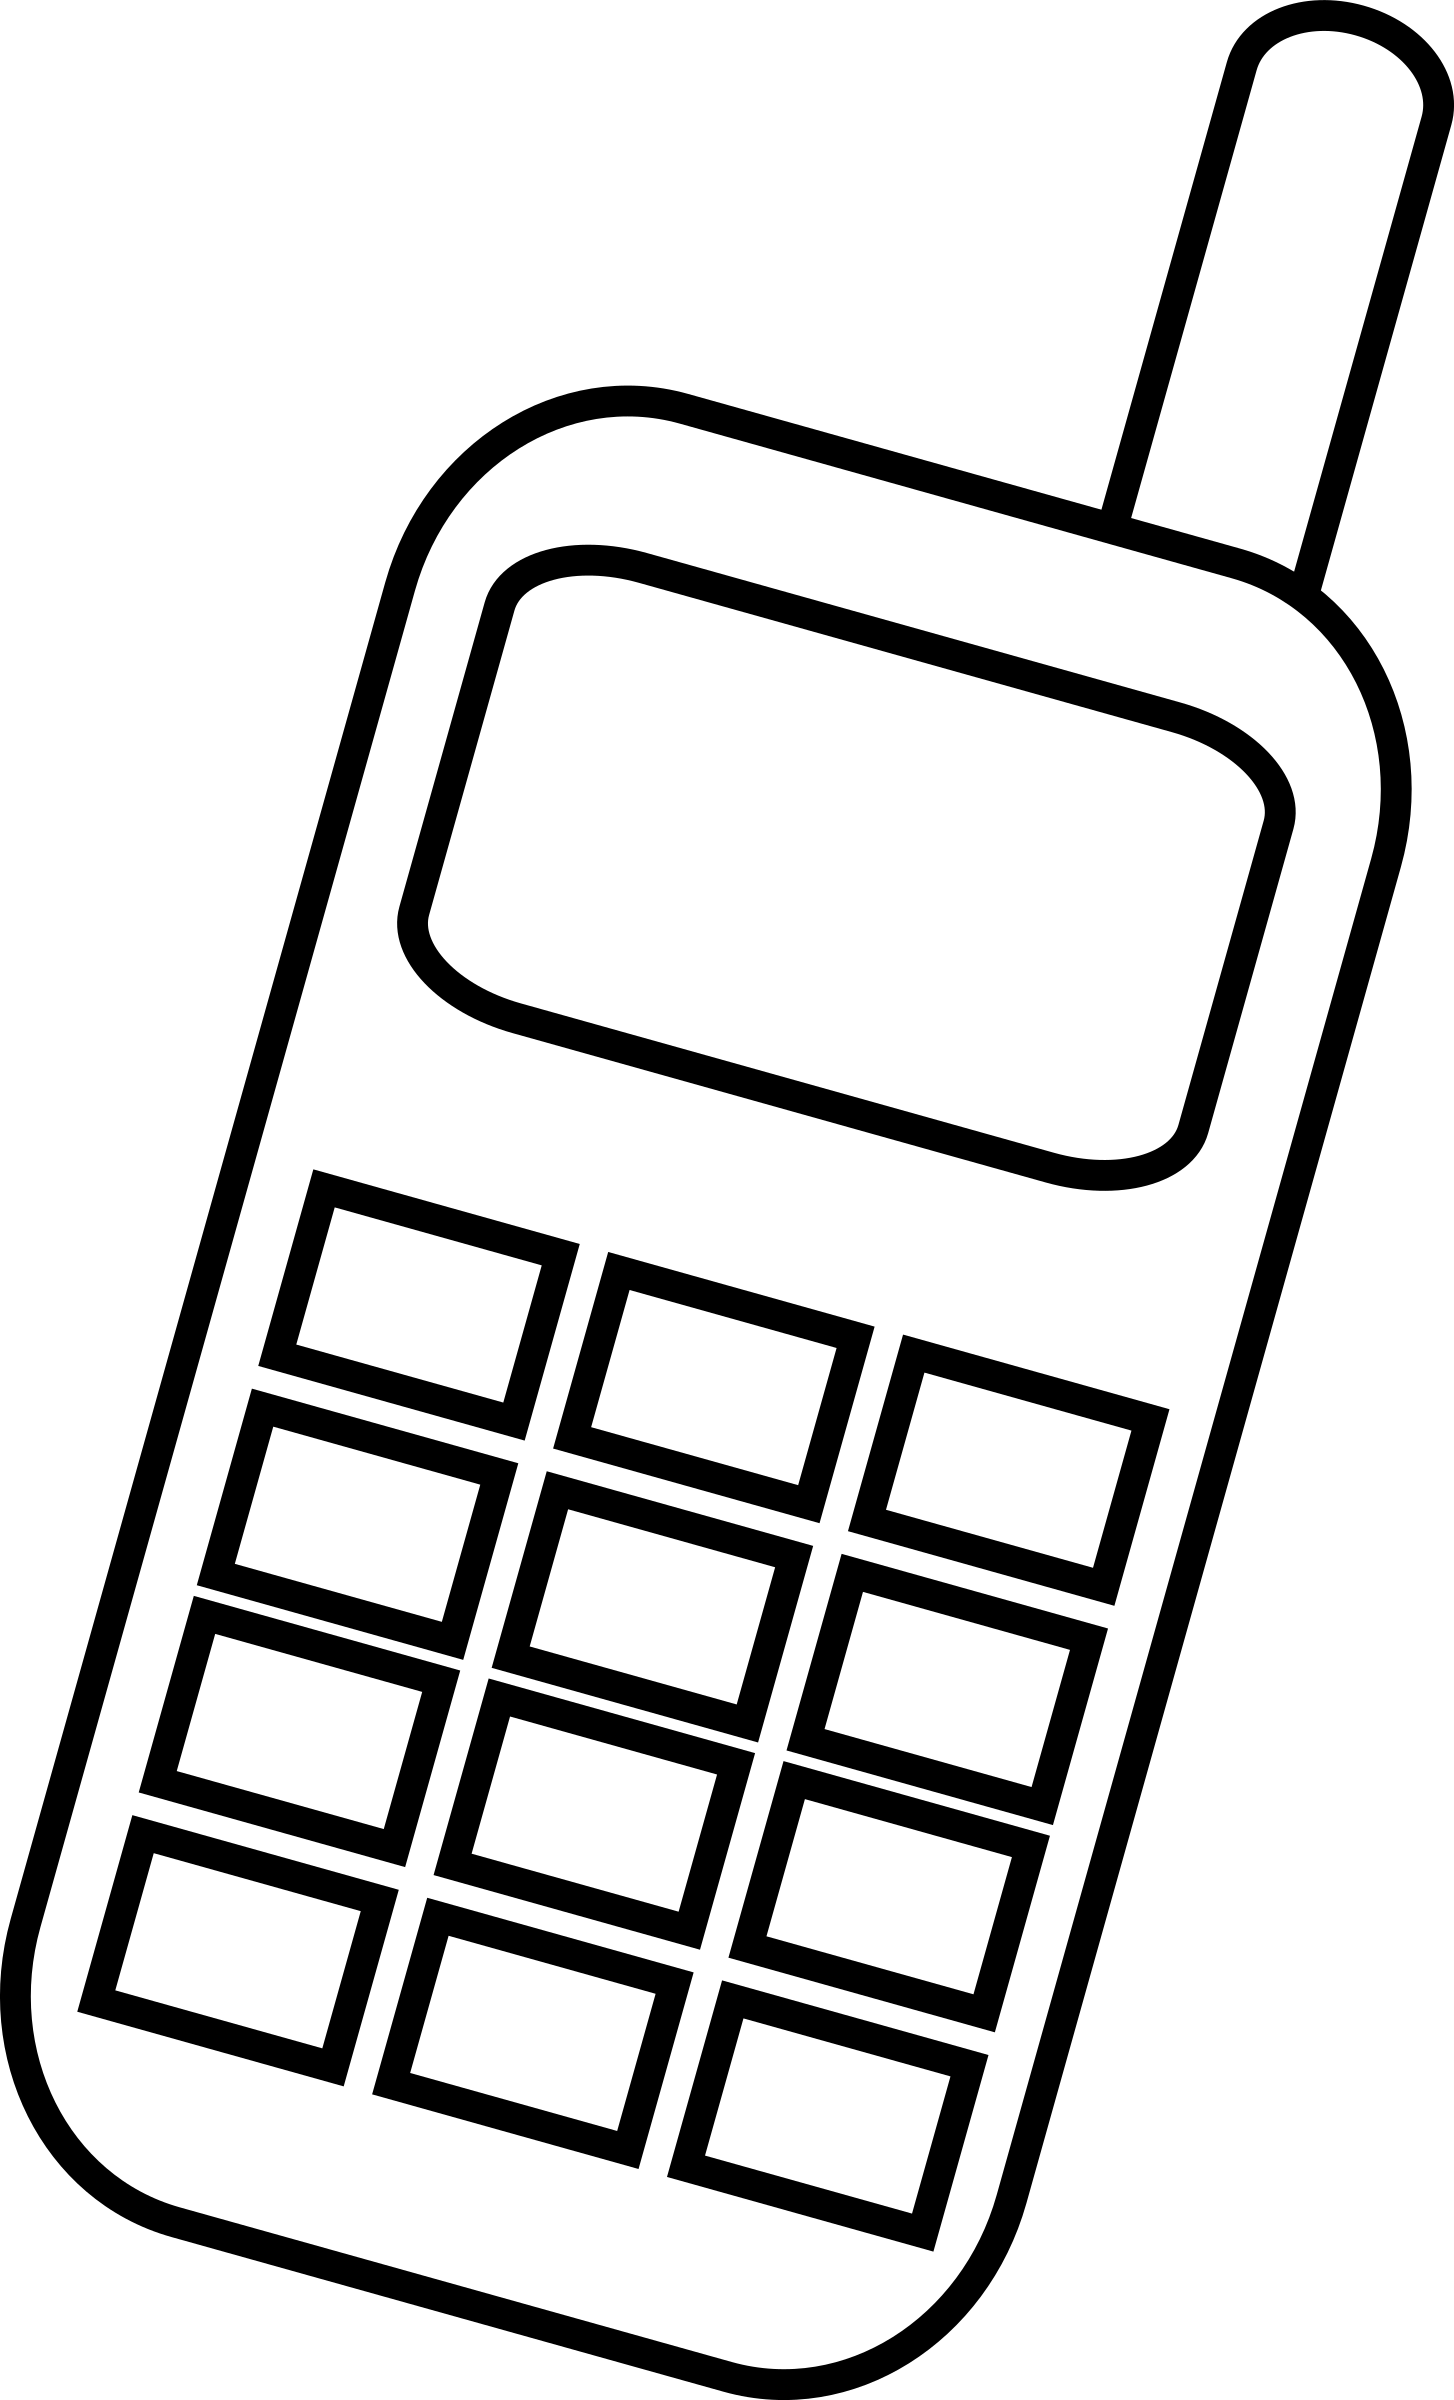 Telephone clipart draw.